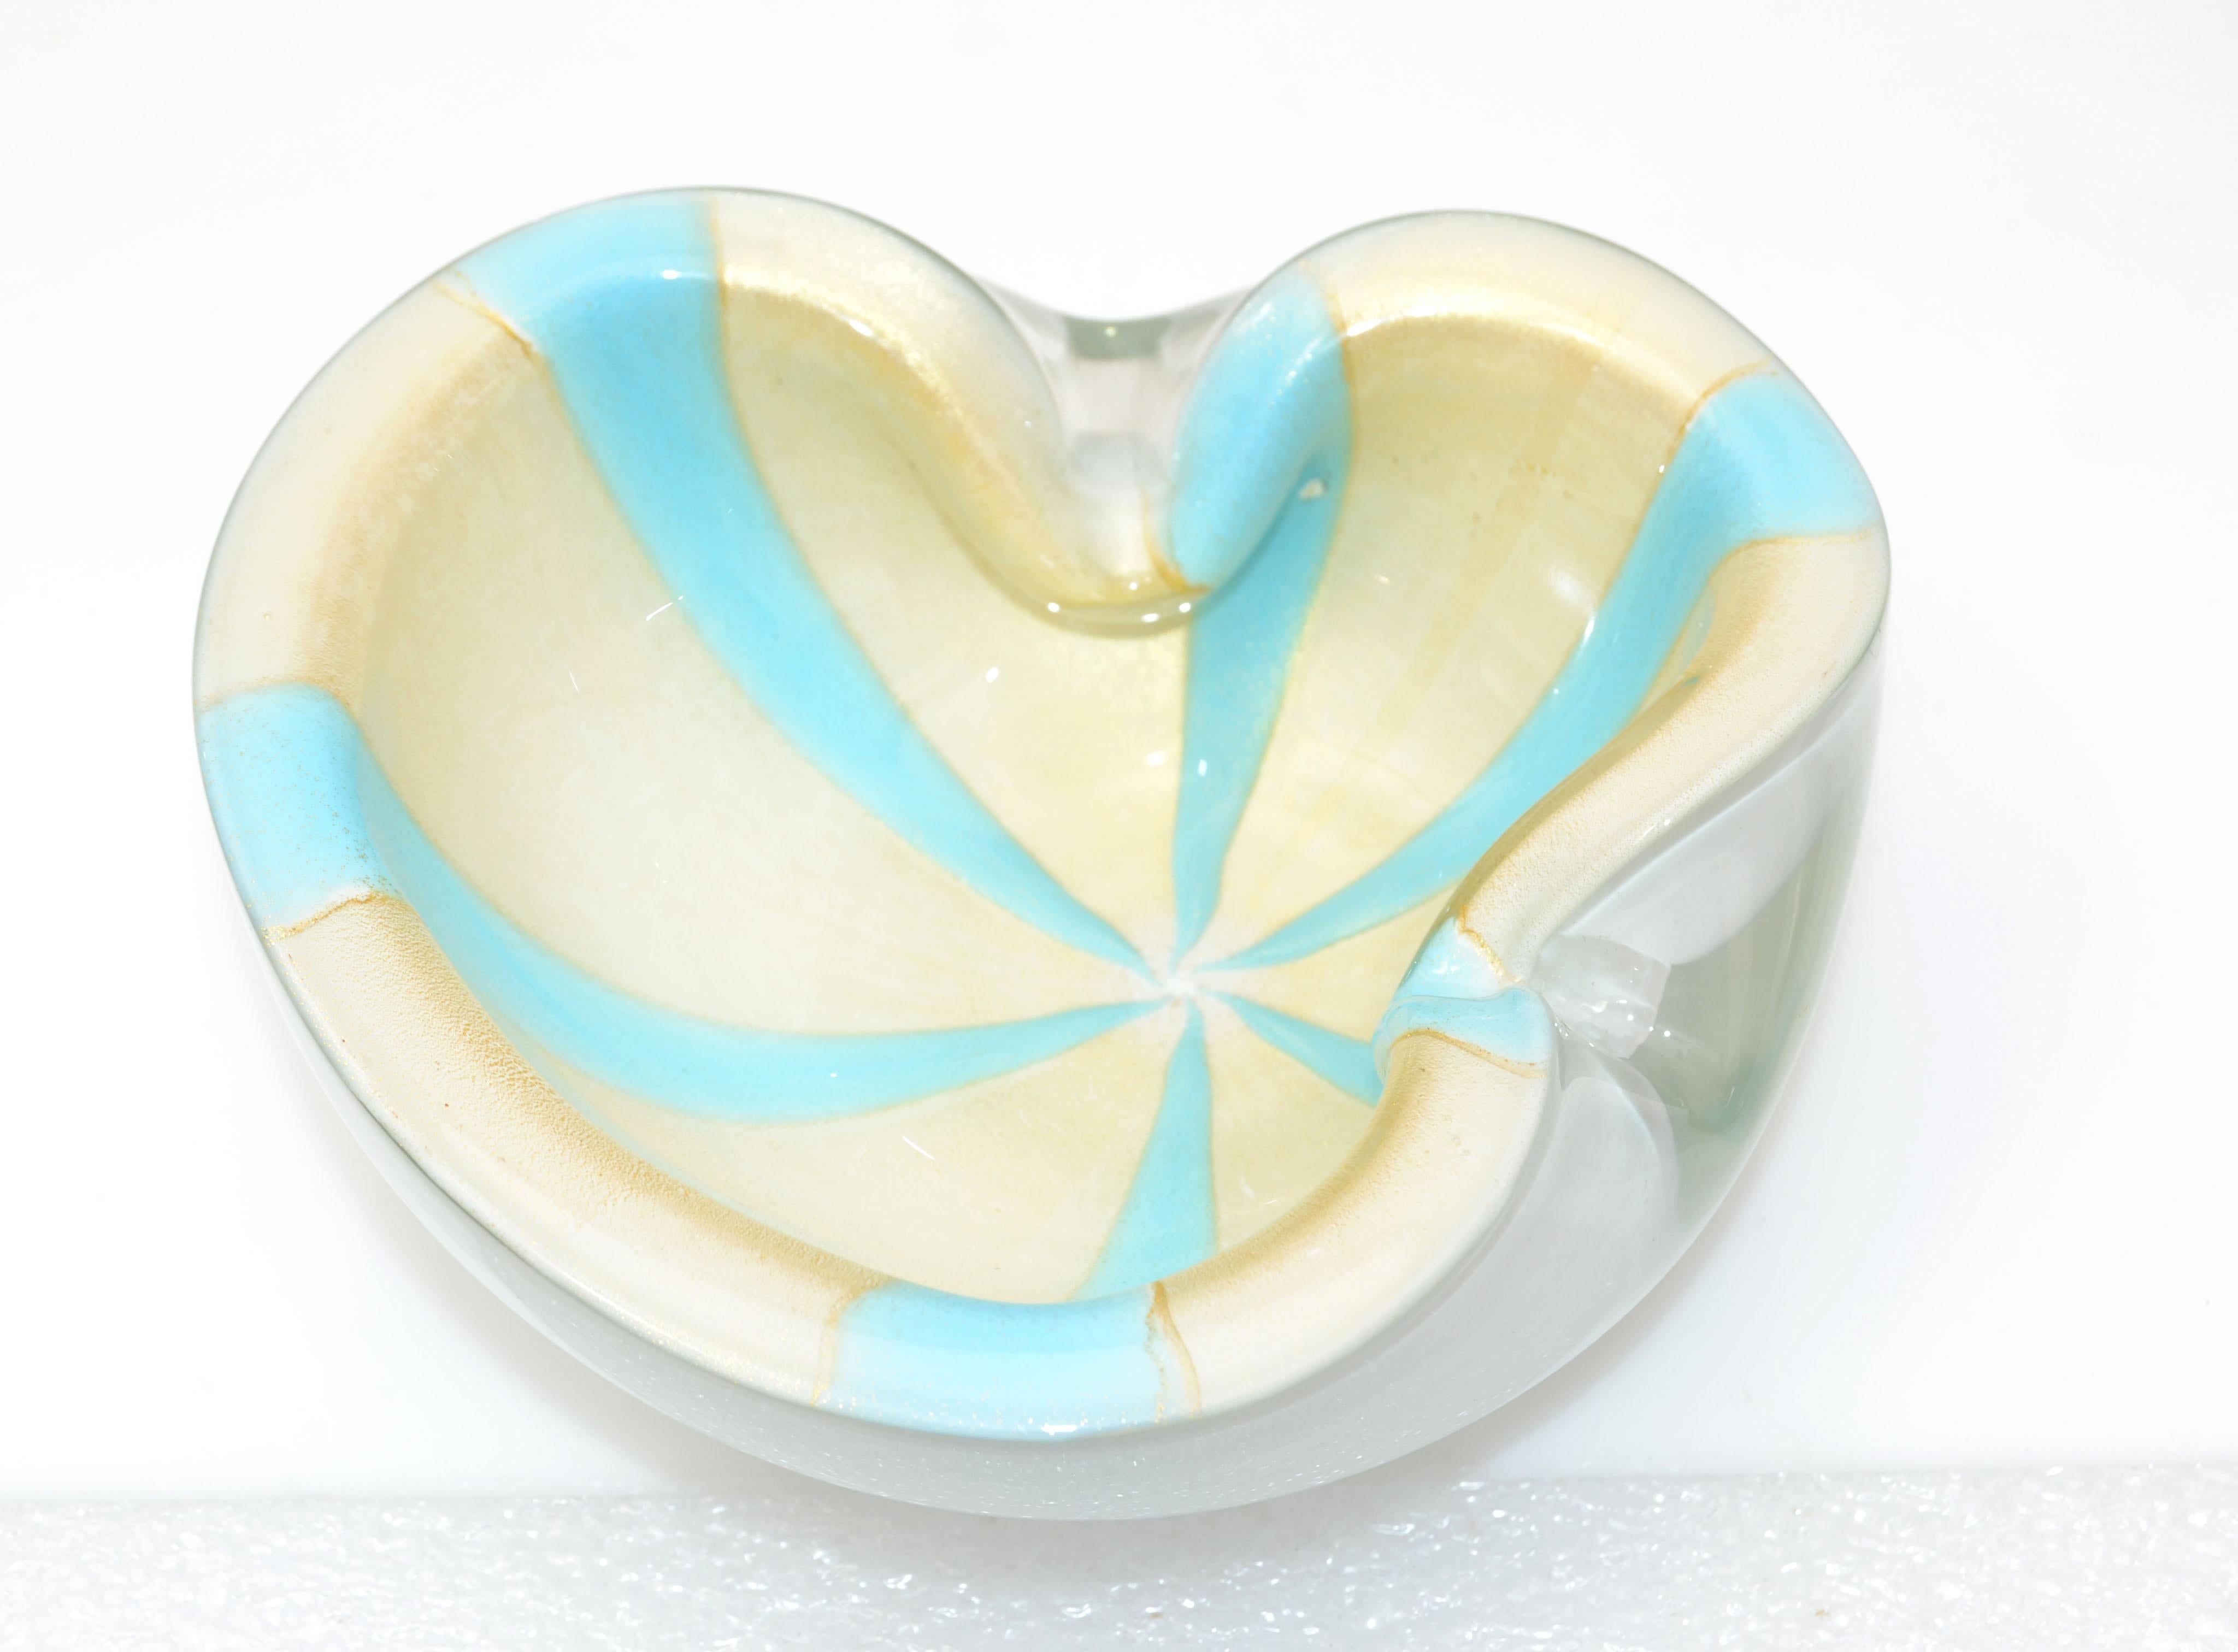 Italian Mid-Century Modern Flavio Poli swirl triple cased white, turquoise & gold dust blown glass bowl, catchall or ashtray. 
Made in the 1960.
Simply beautiful.